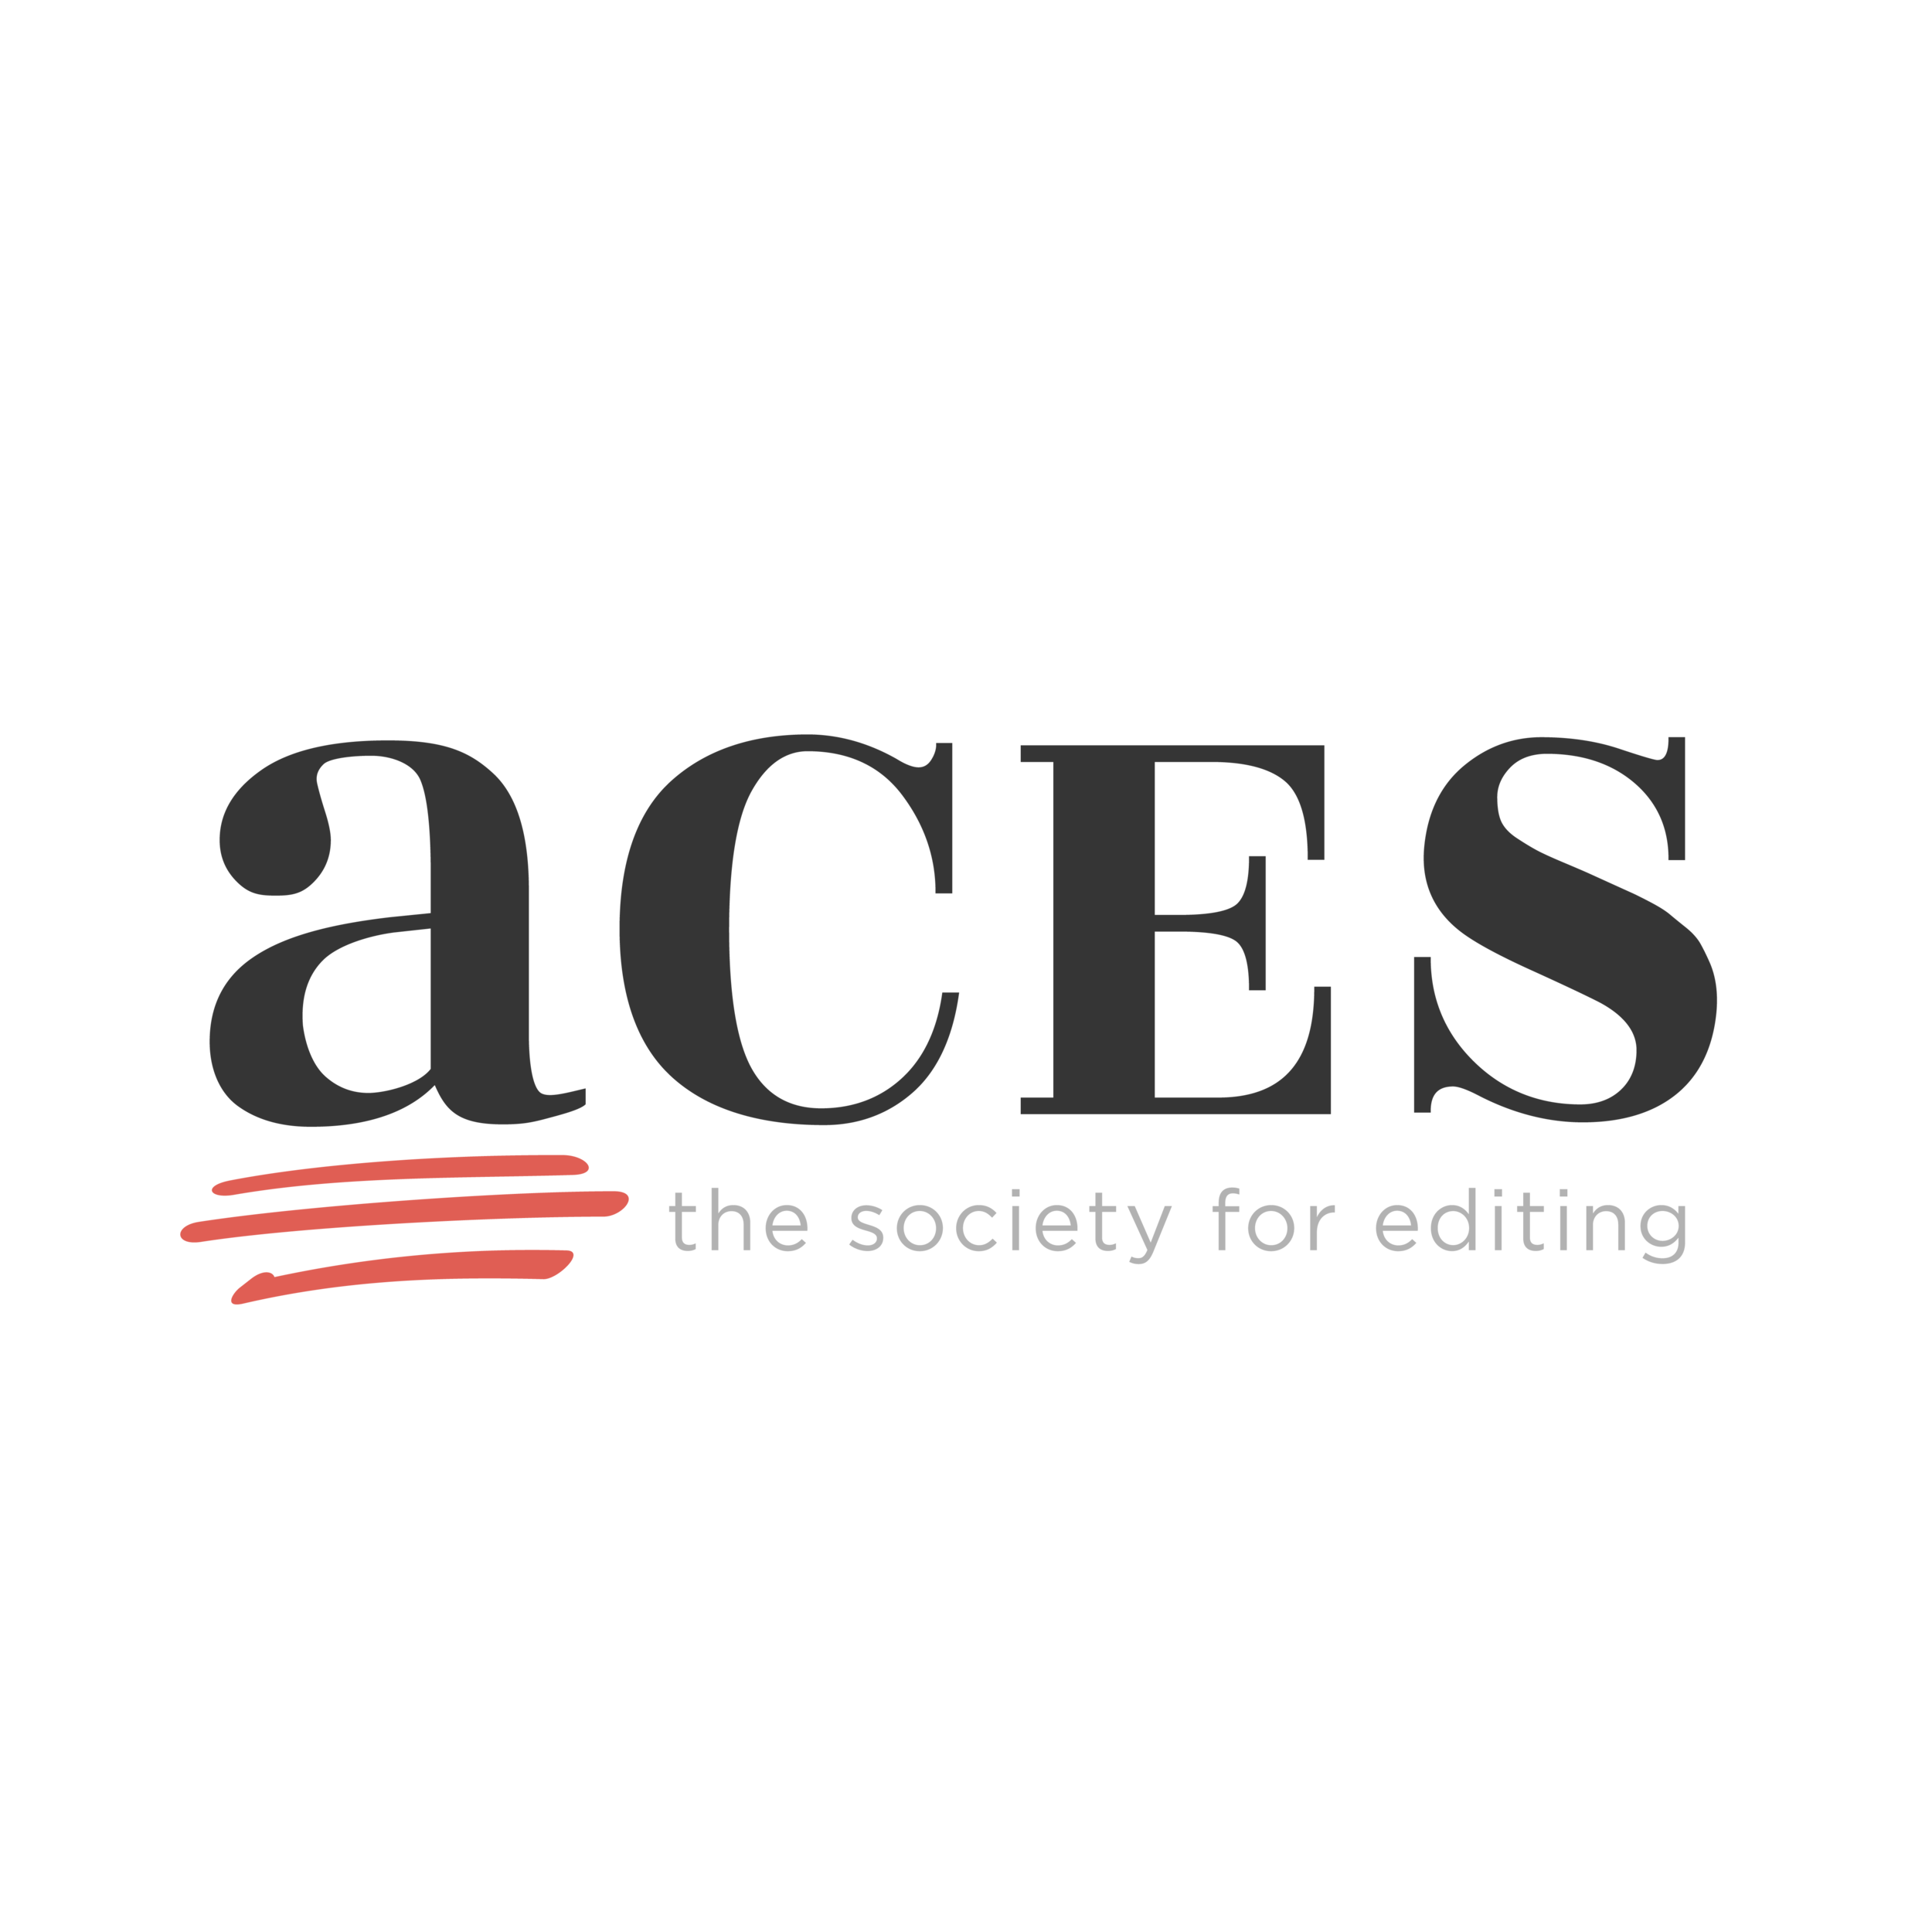 aces-full-logo-with-tagline.png